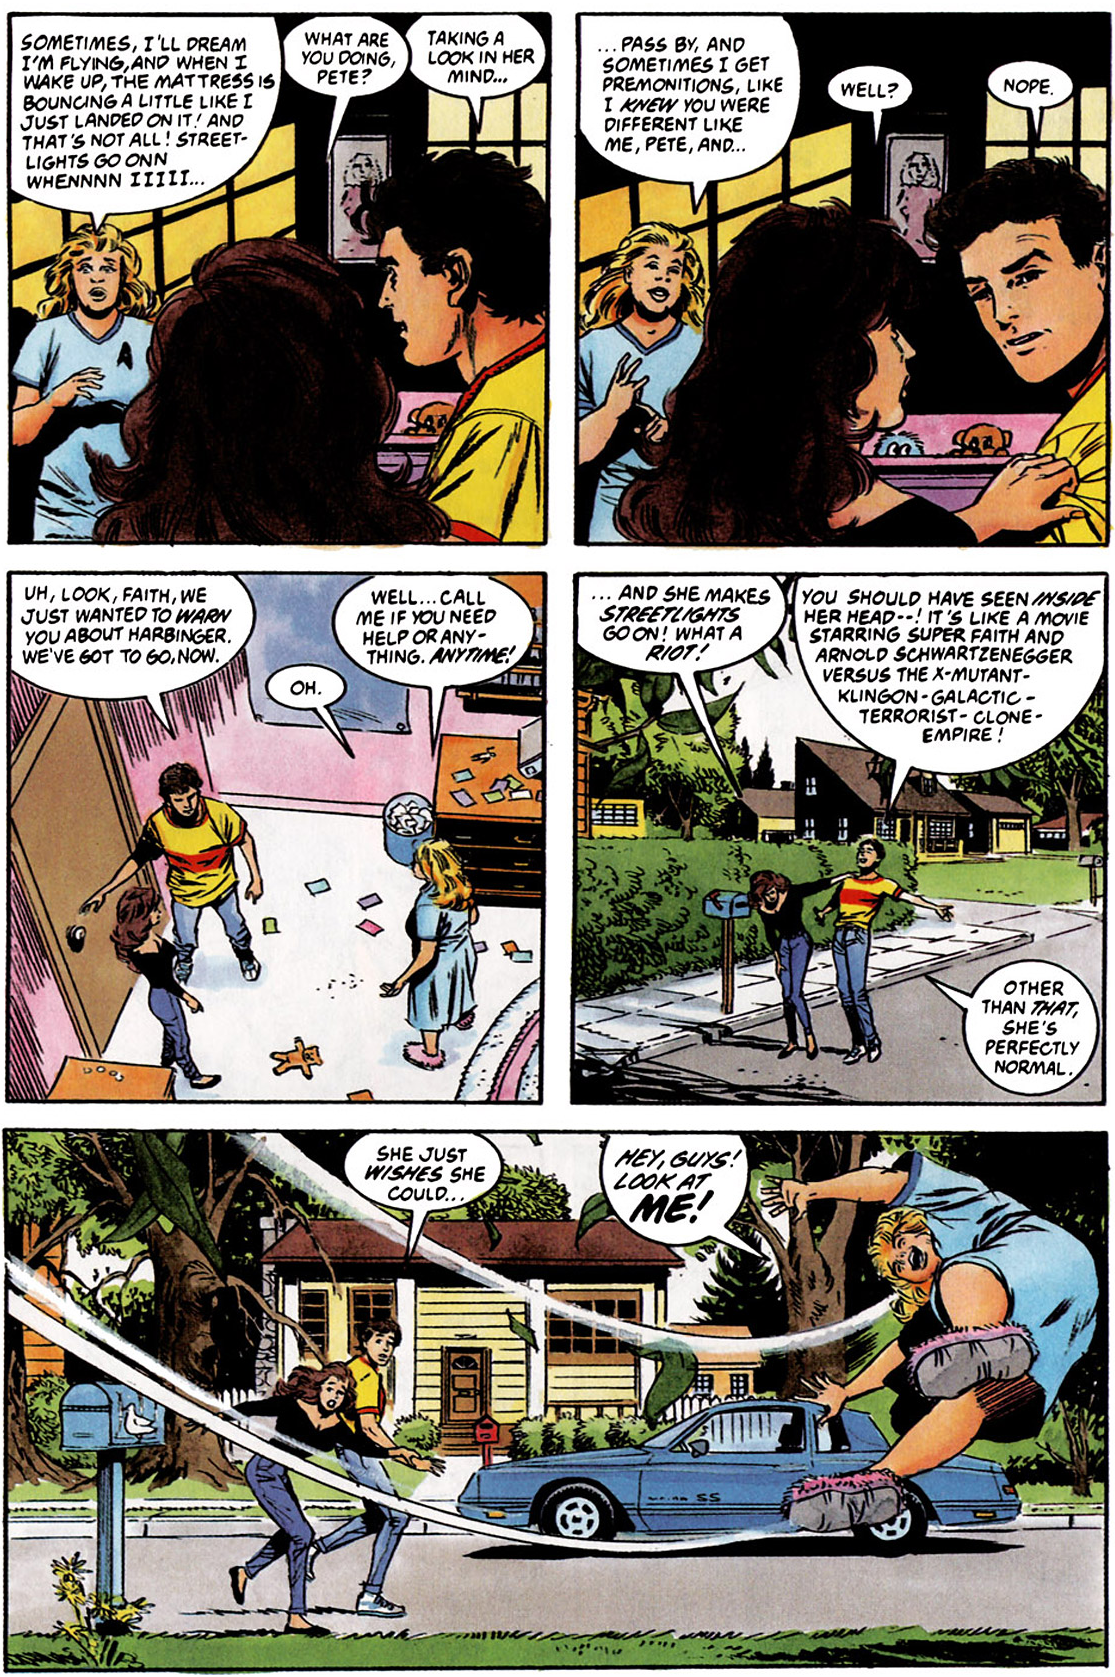 Faith discovers her powers after meeting Sting and Kris Hathaway in Harbinger Vol. 1 #1 "Children of the Eighth Day" (1992), Valiant Comics. Words by Jim Shooter, art by David Lapham, Jon Dizon, Janet Jackson, and John Costanza.